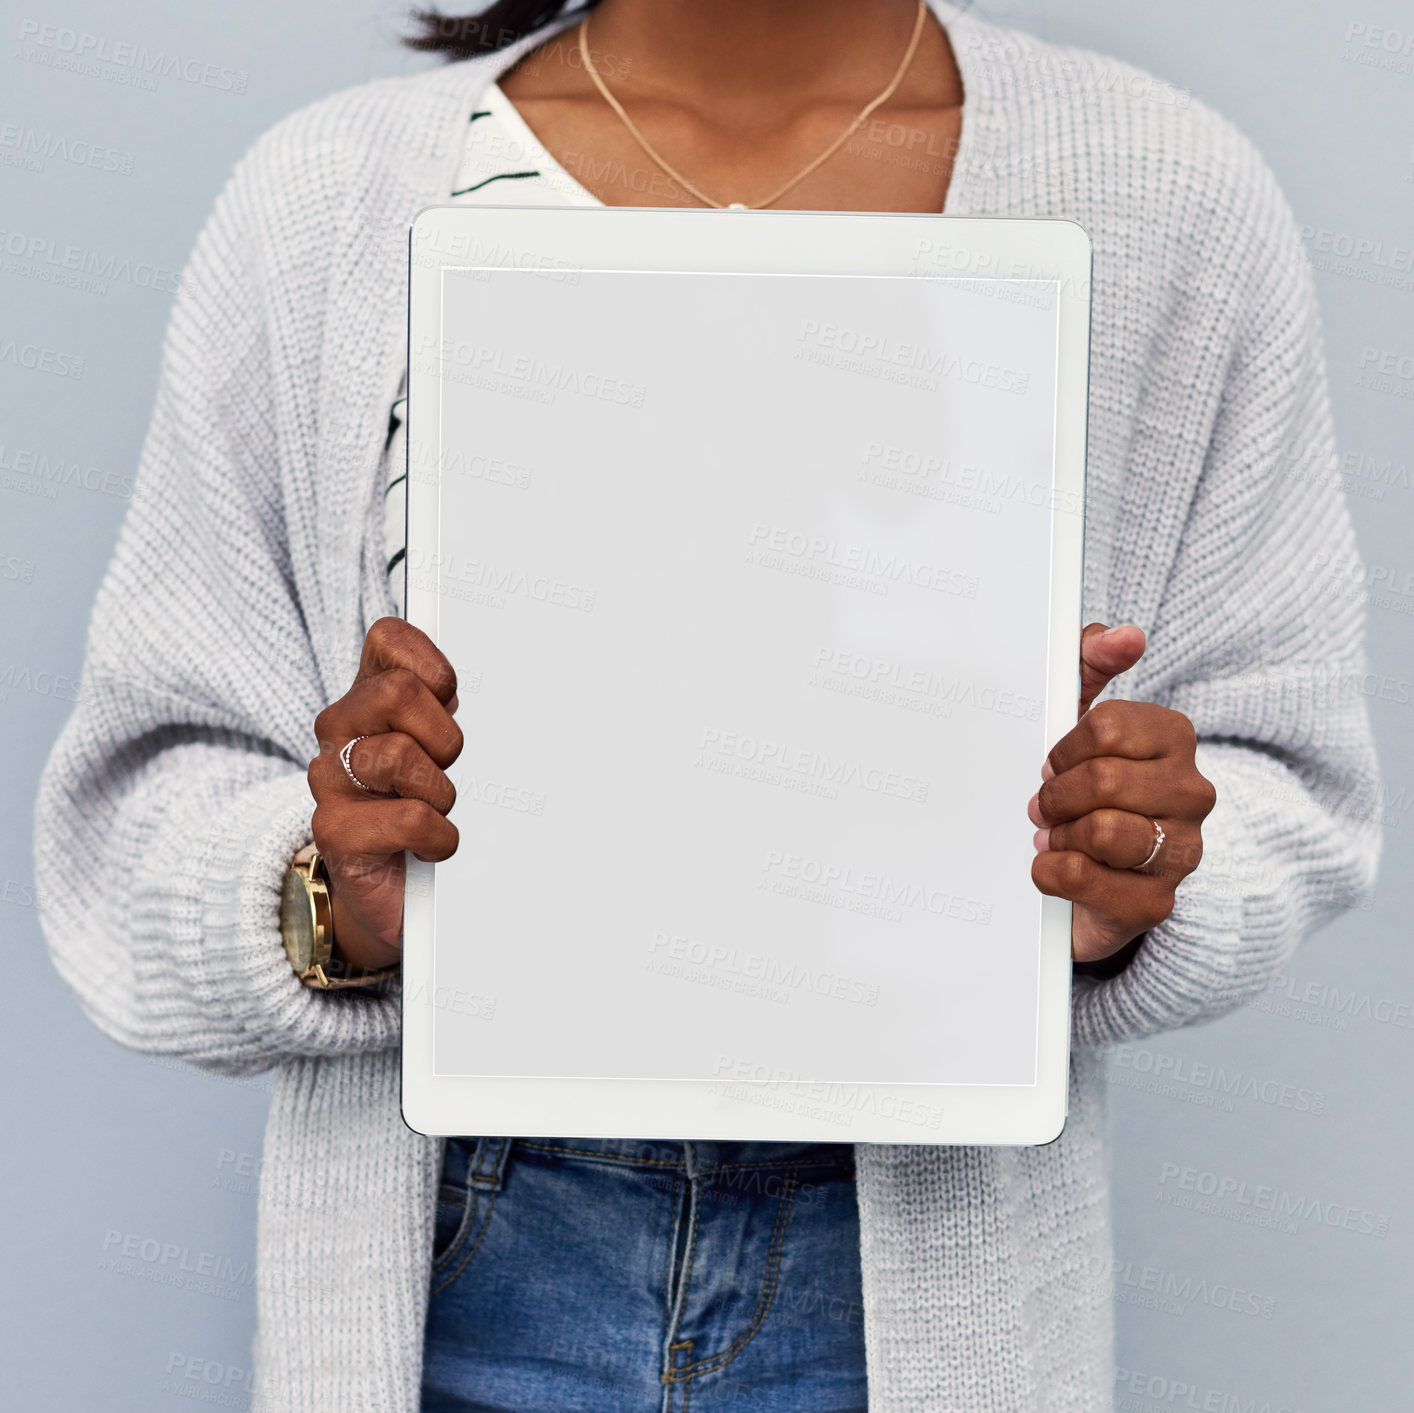 Buy stock photo Studio shot of an unrecognizable young woman holding a blank tablet against a grey background